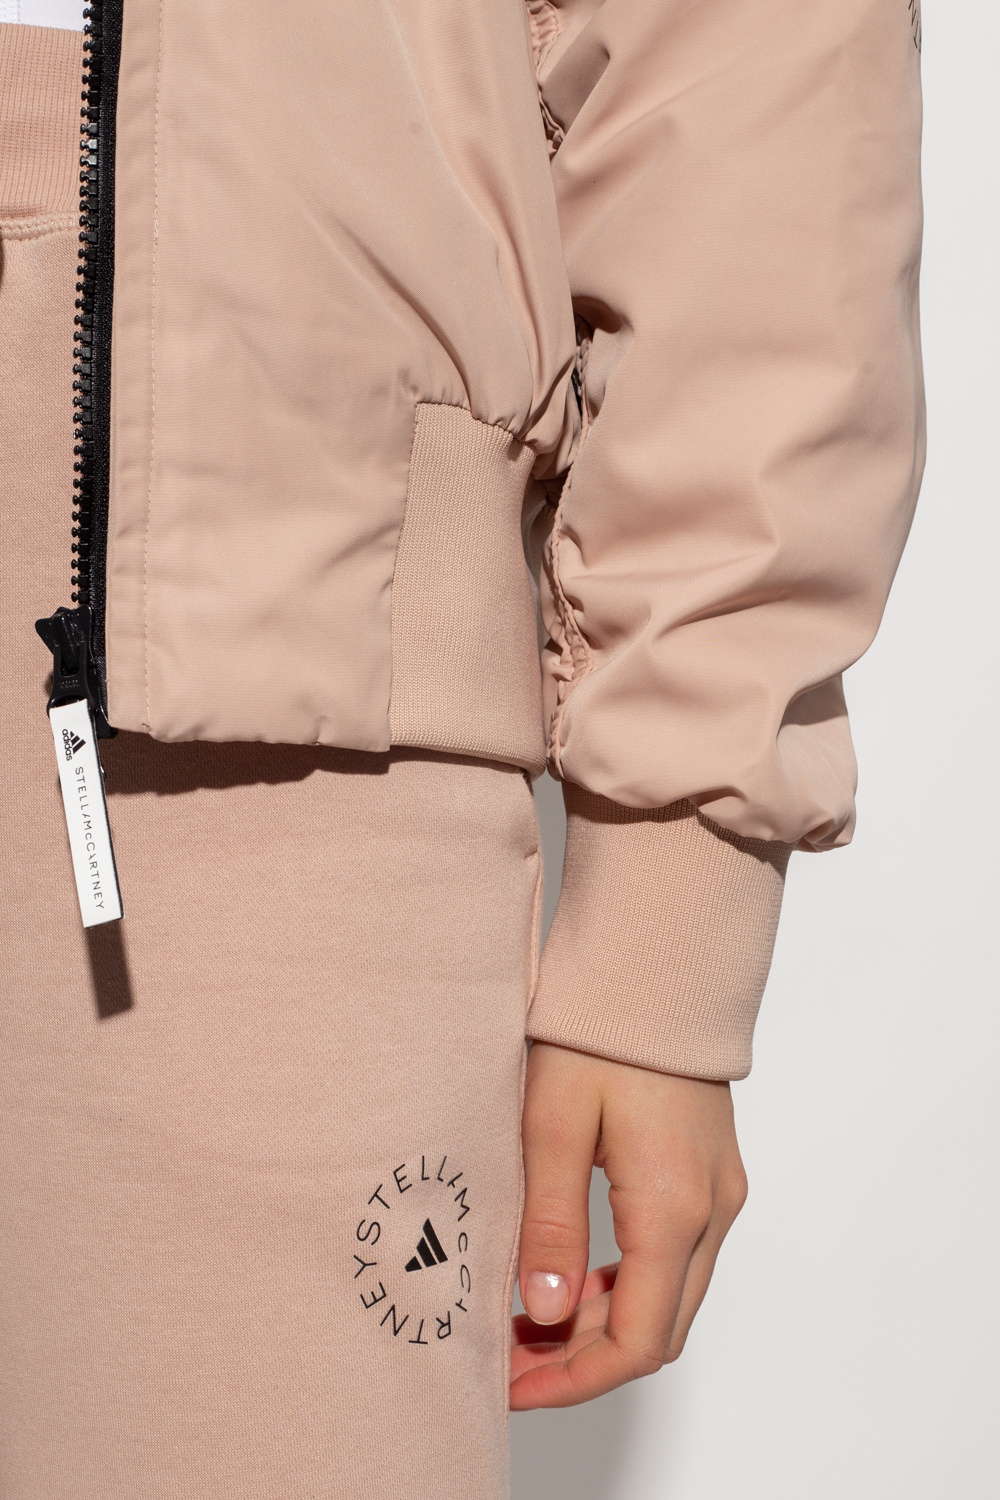 ADIDAS by Stella McCartney ‘Agent of Kindness ‘ collection sweatpants